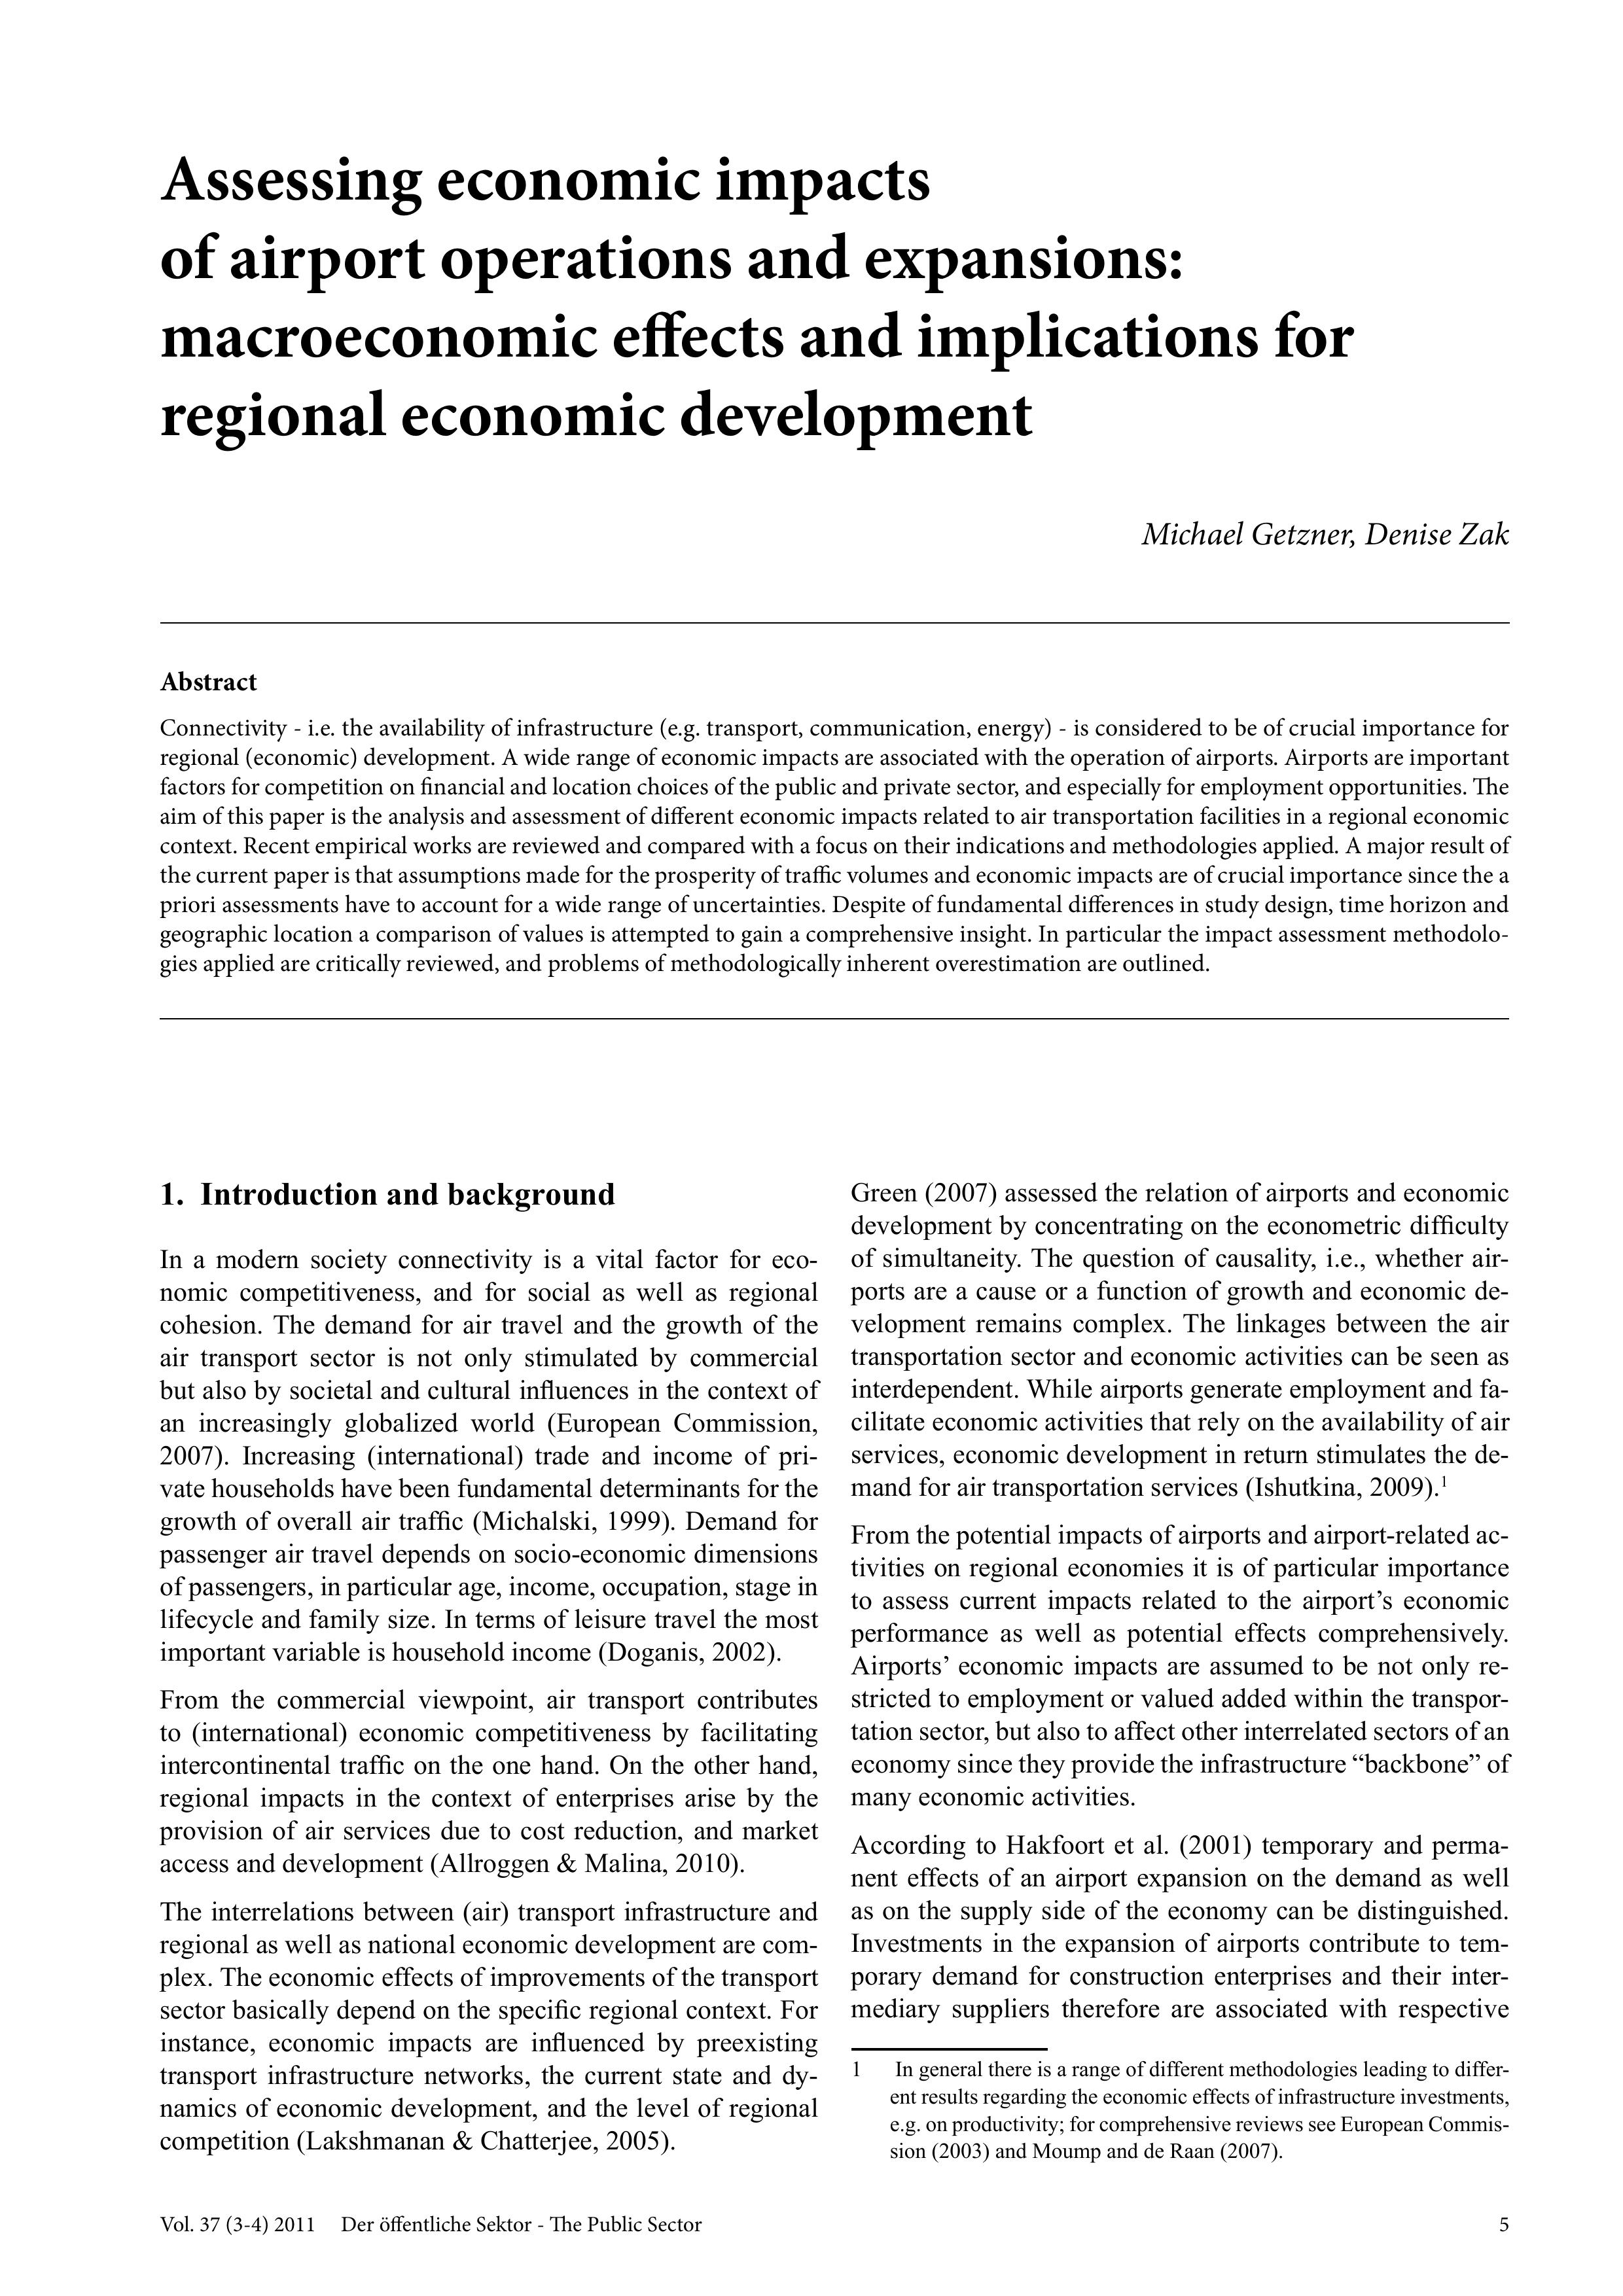 Assessing economic impacts of airport operations and expansions: macroeconomic effects and implications for regional economic development